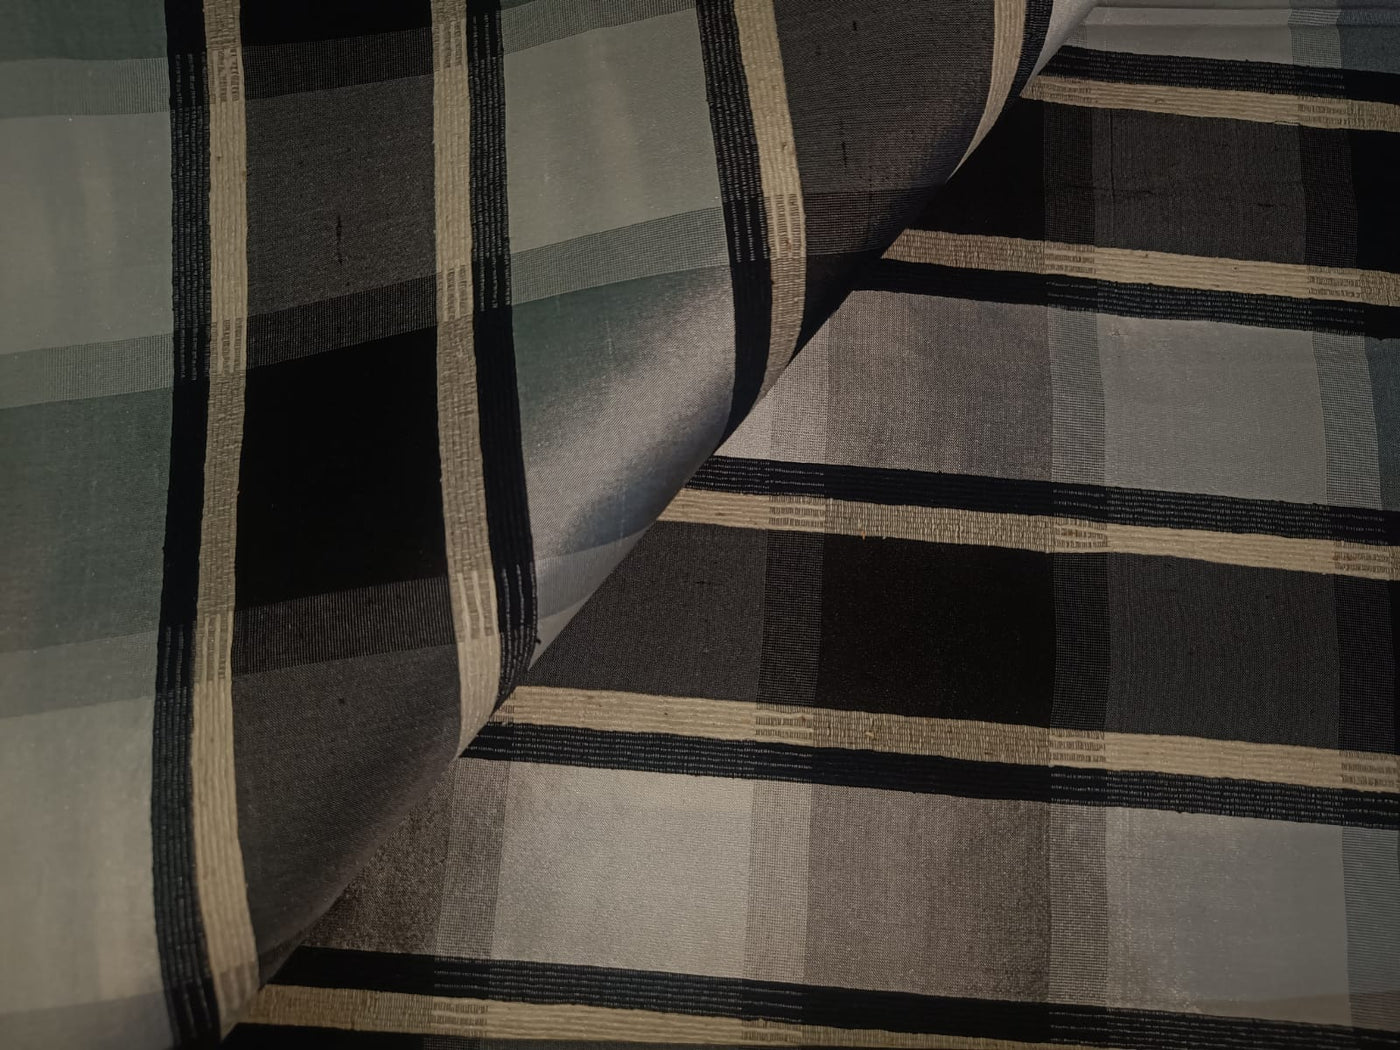 Silk Dupioni Fabric Plaids black grey and white color 54" wide DUP#C99[1]